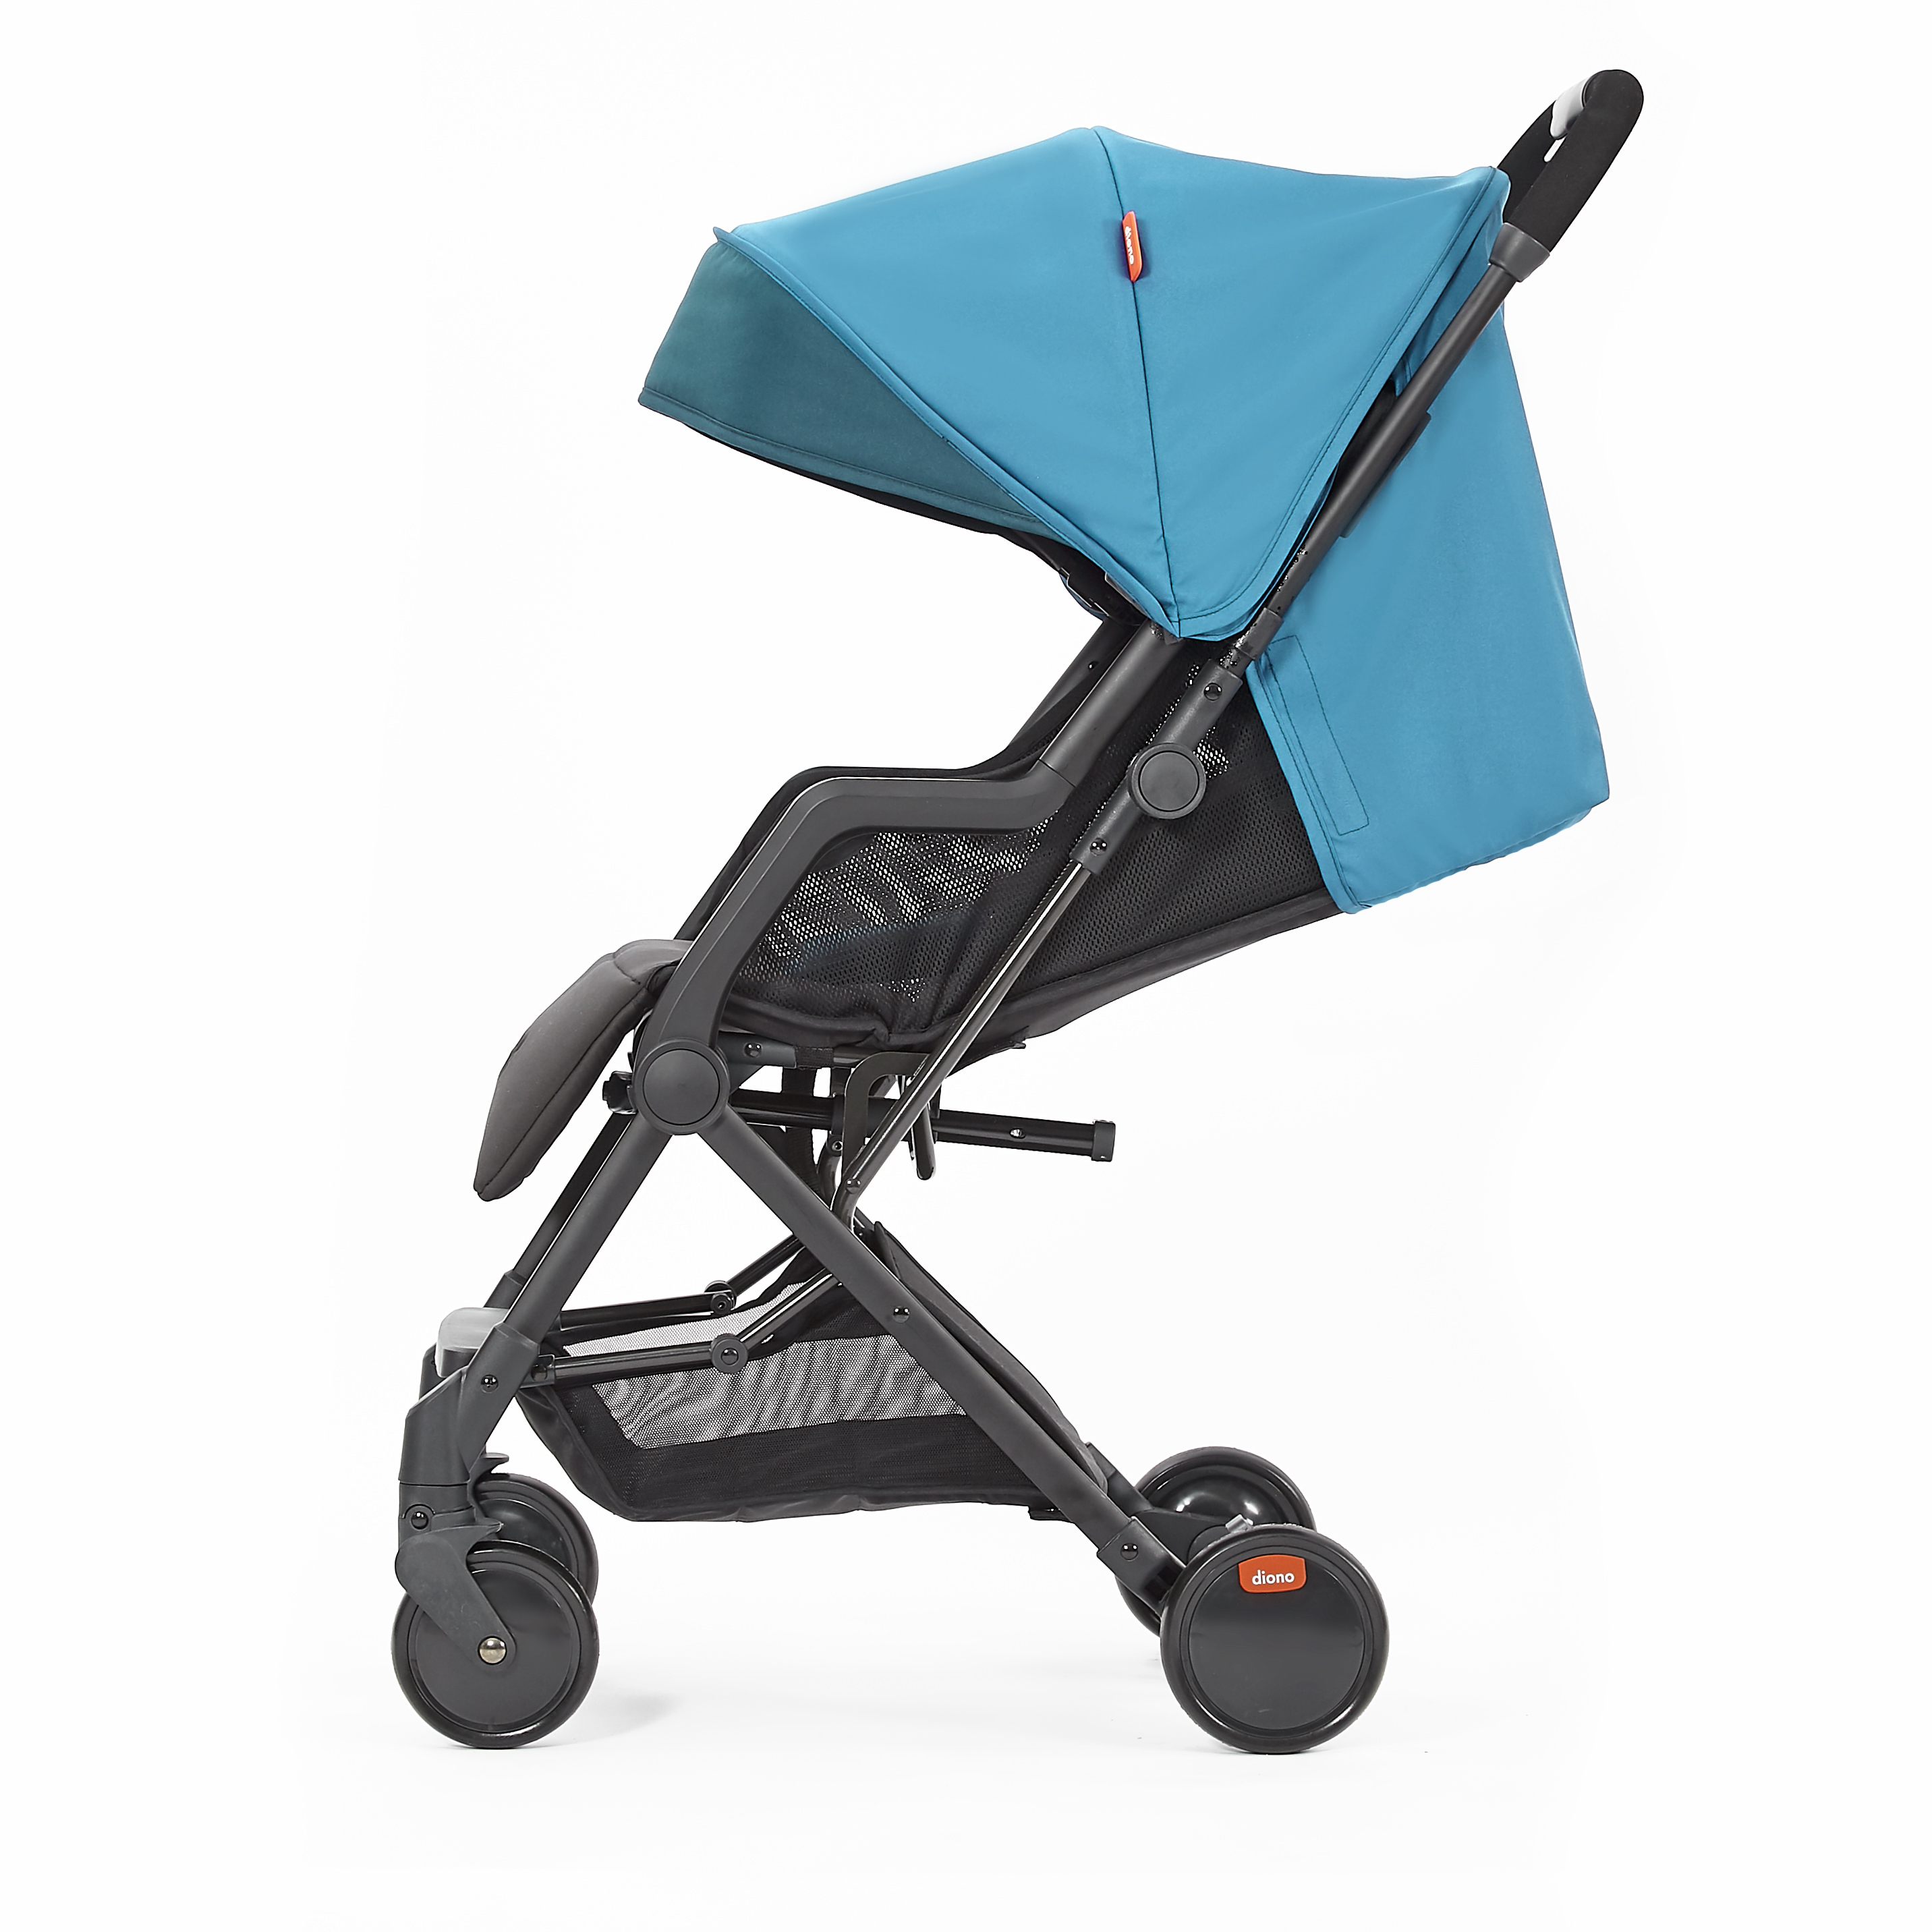 Diono Traverze Plus Lightweight Compact Stroller with Easy Fold, Teal - image 6 of 9